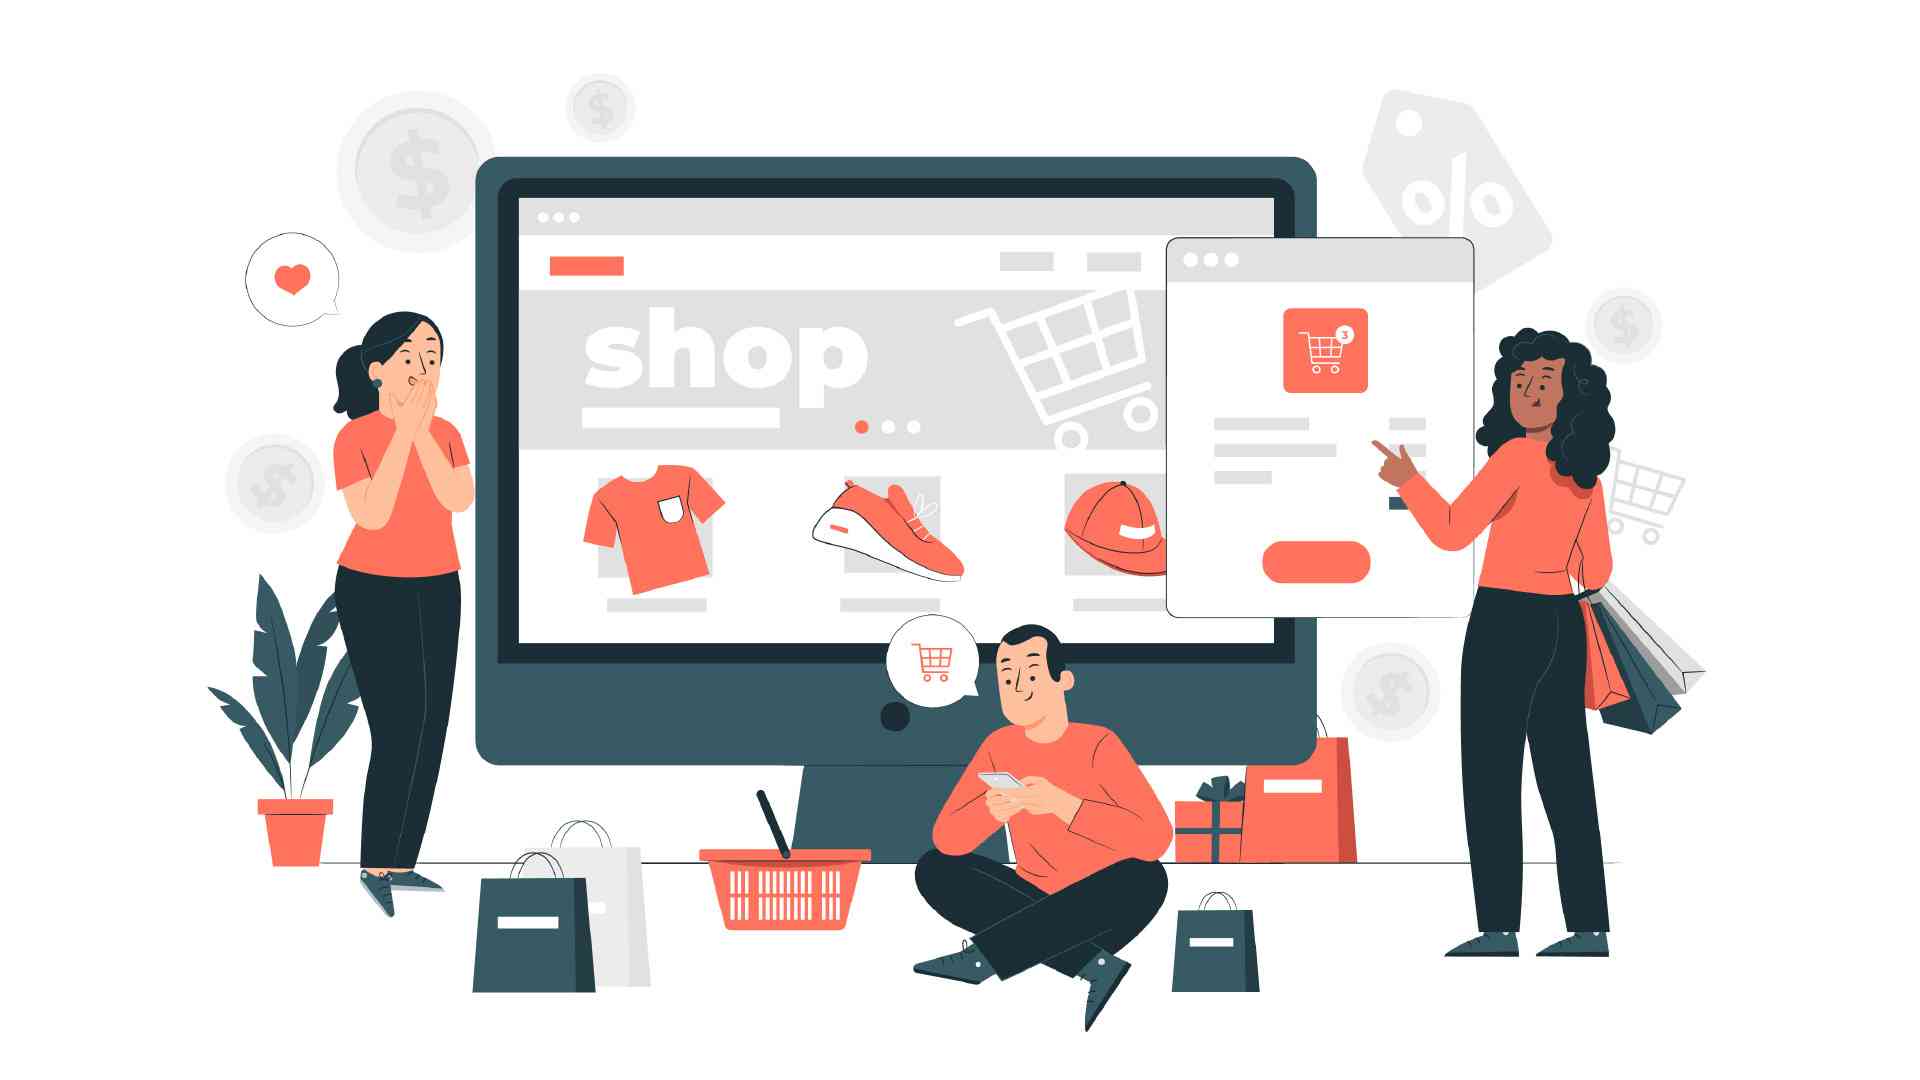 What need to considered when building e-commerce website